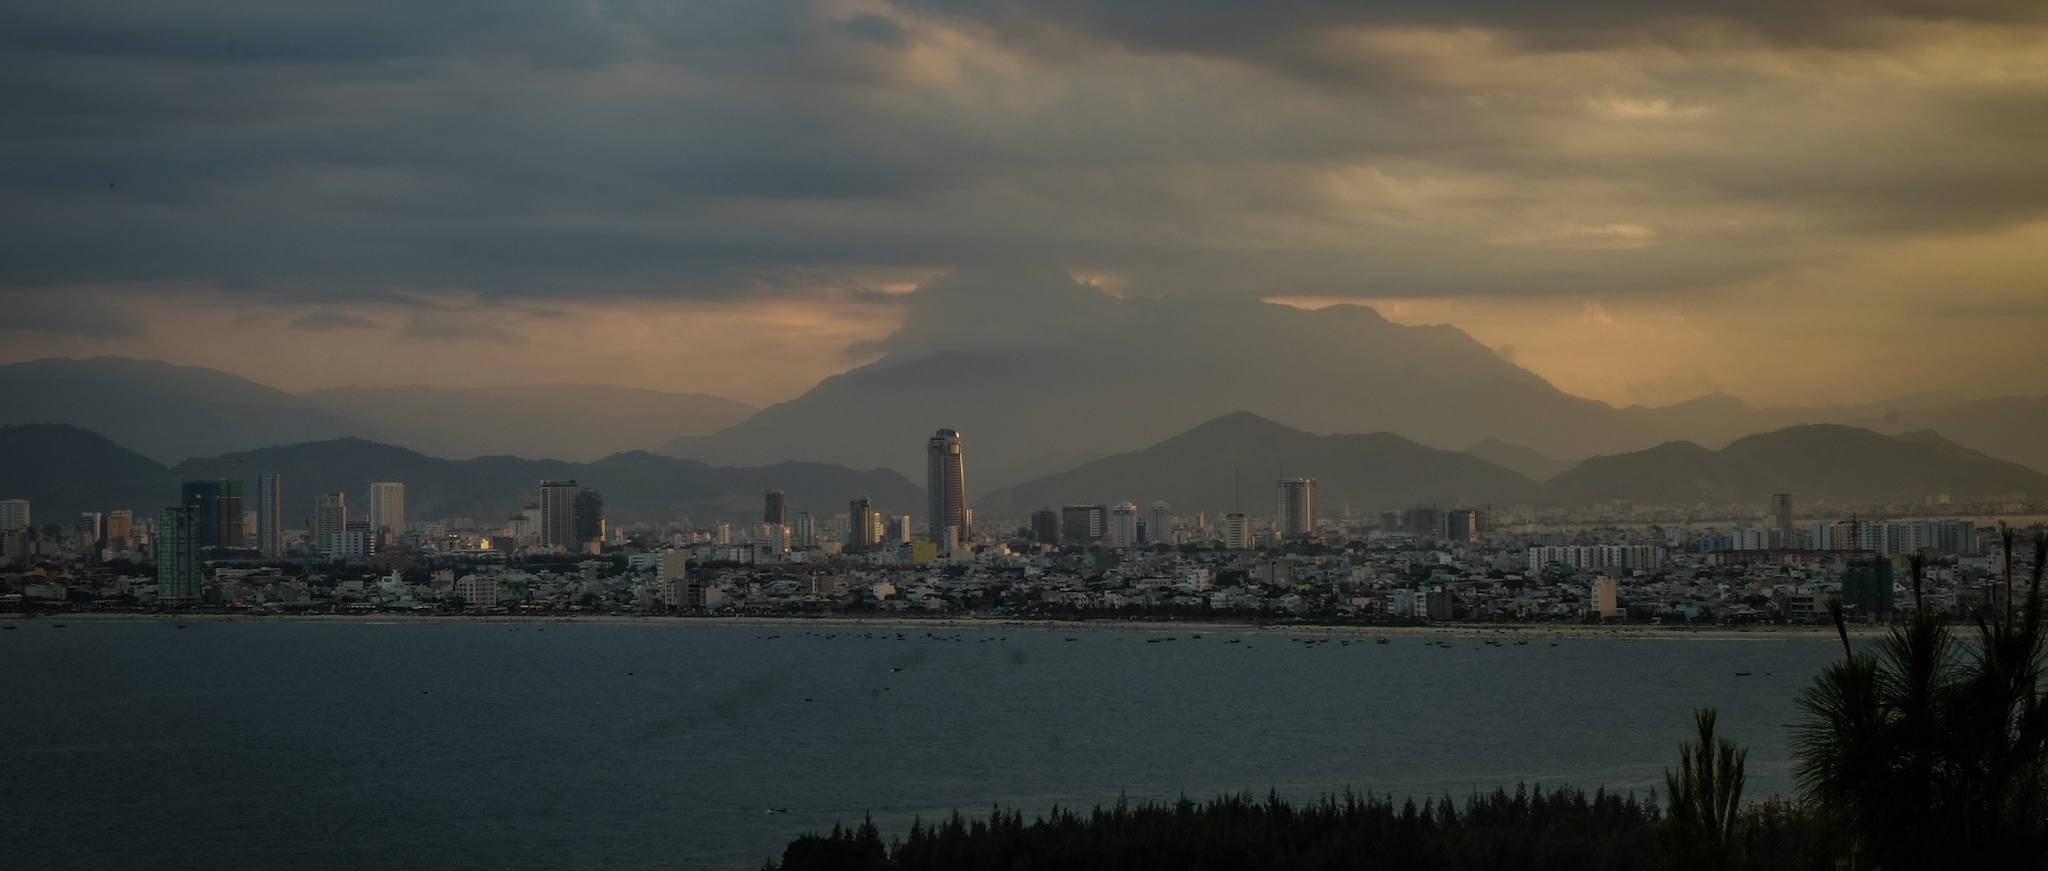 A cloudy view over a bay with mountains at sunset